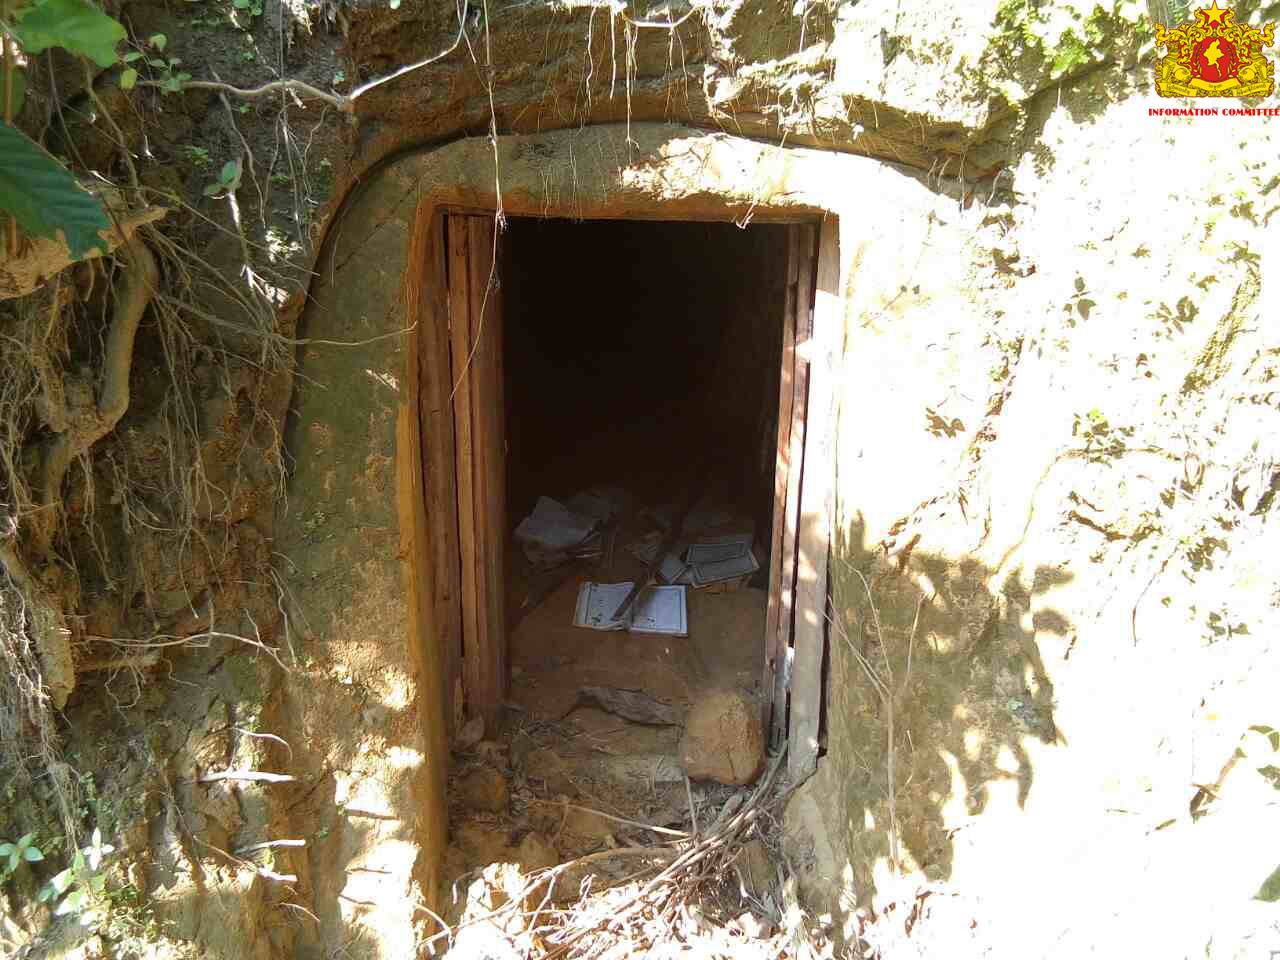 Security forces find more ARSA tunnels in northern Rakhine: state media